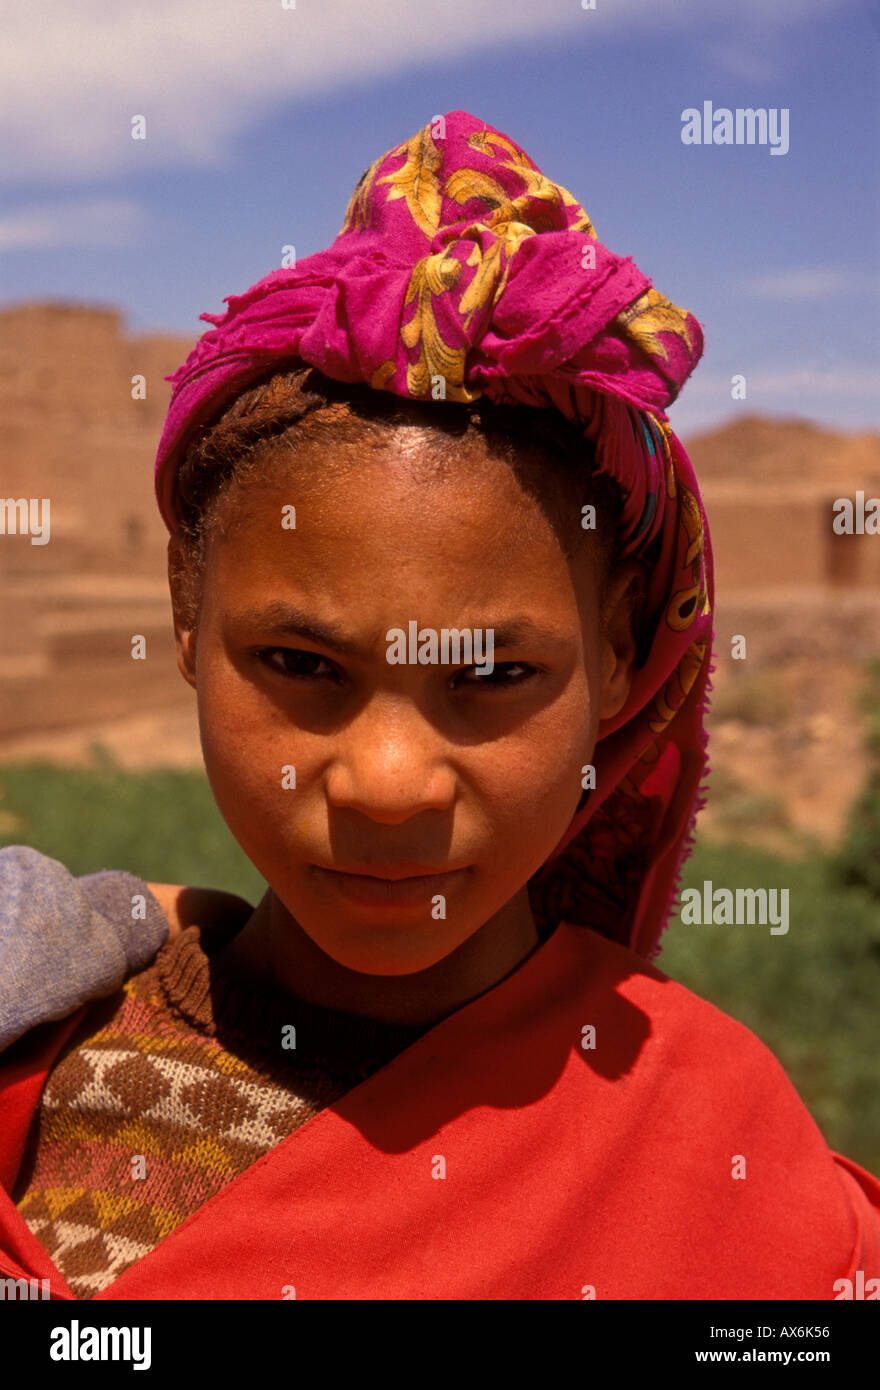 1, one, Moroccan girl, Moroccan, girl, young girl, female child, child, eye contact, front view, Skoura, Dades Valley, Morocco, Africa Stock Photo